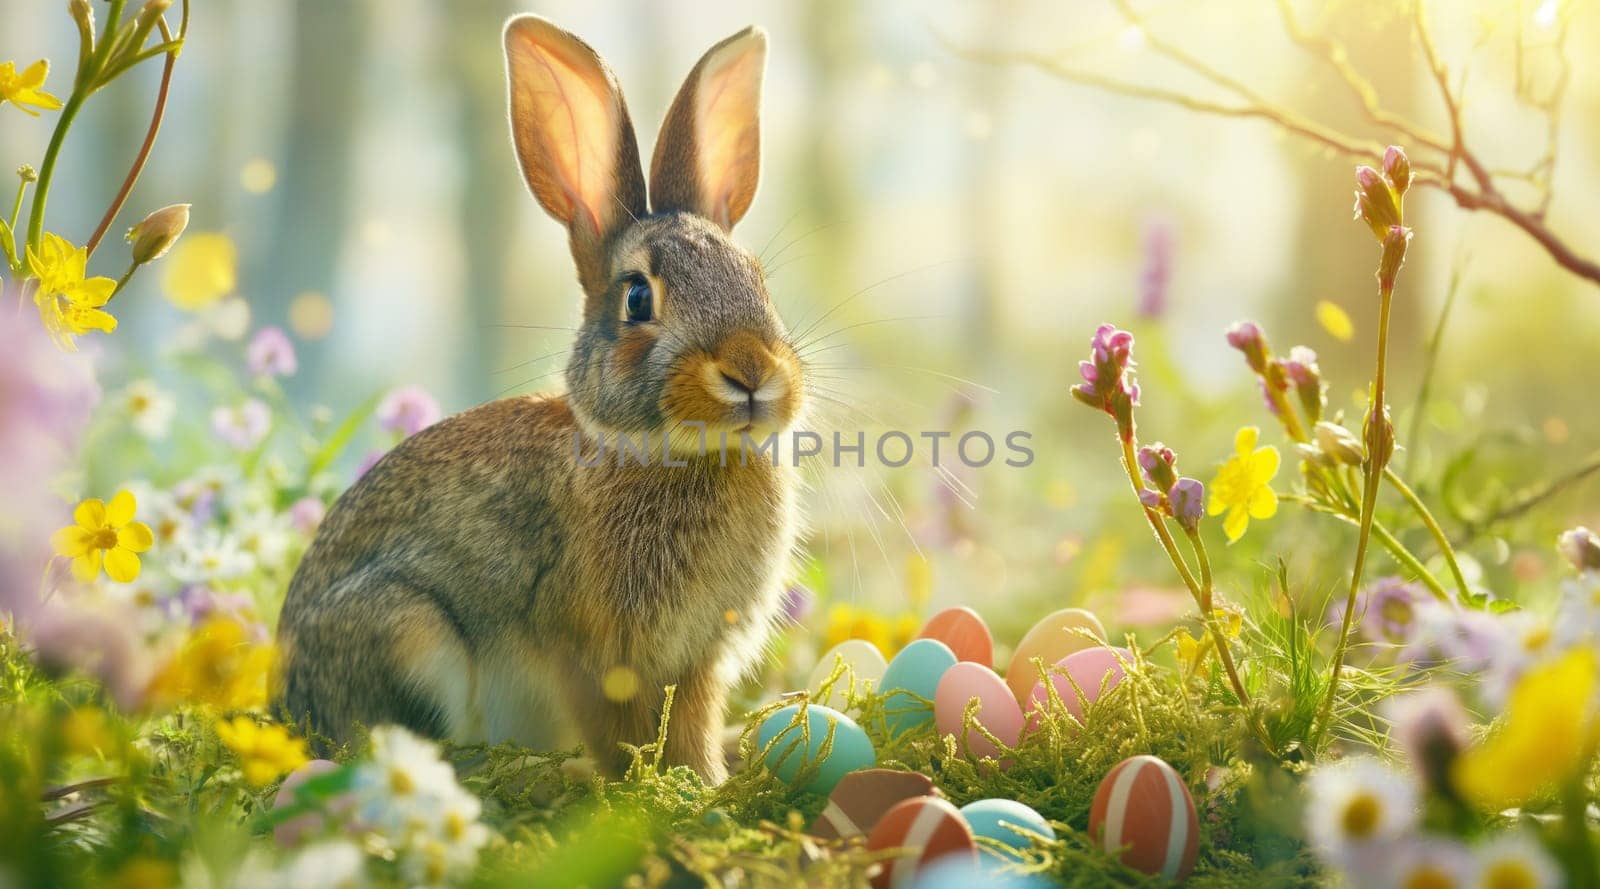 Rabbit surrounded by Easter eggs and flowers in sunlit field by kizuneko